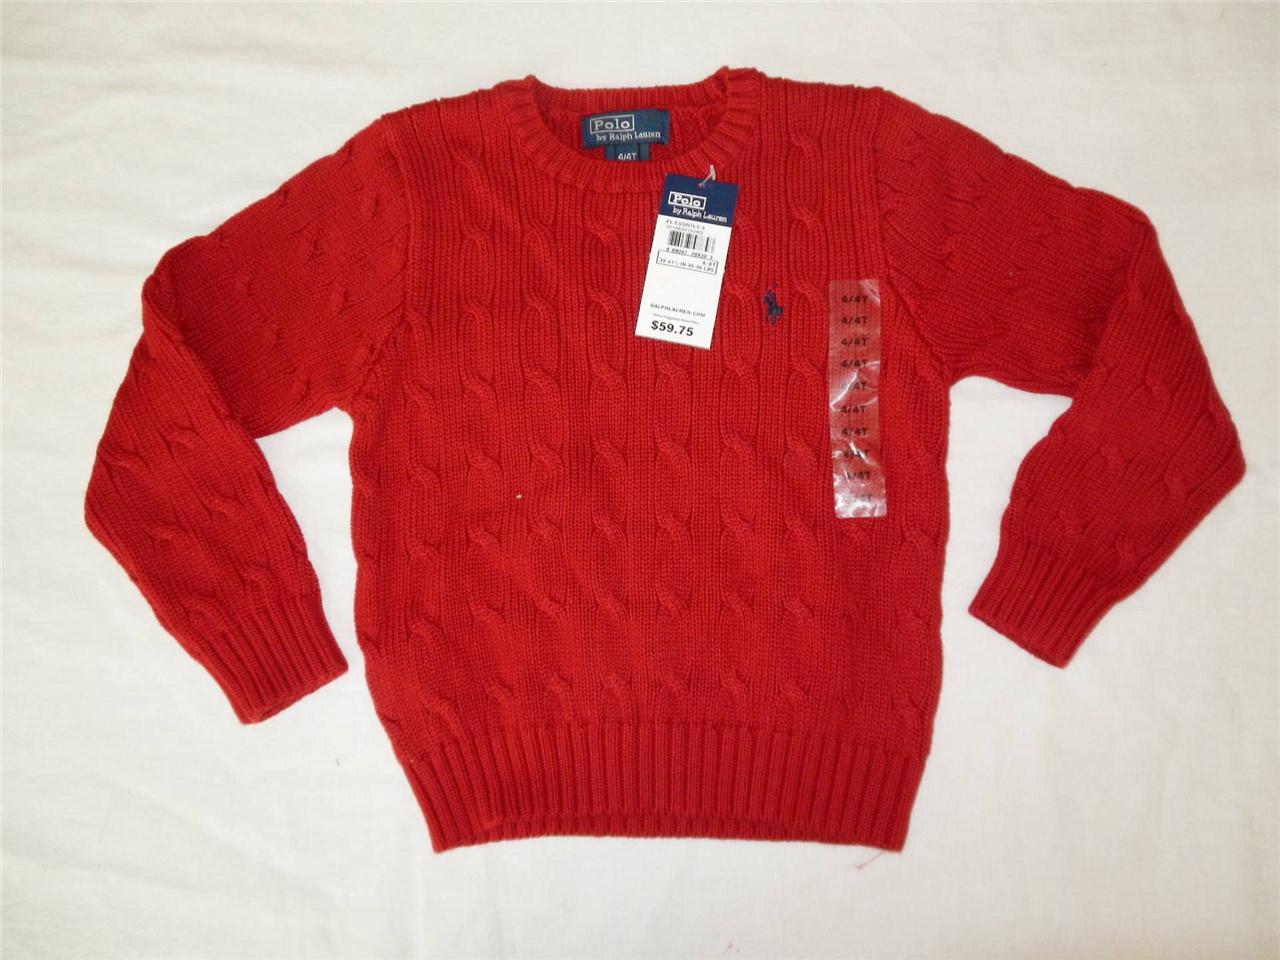 New Toddler Boy's Polo Sweaters Size 24m, 2T, 4T - NWT - Various Colors ...